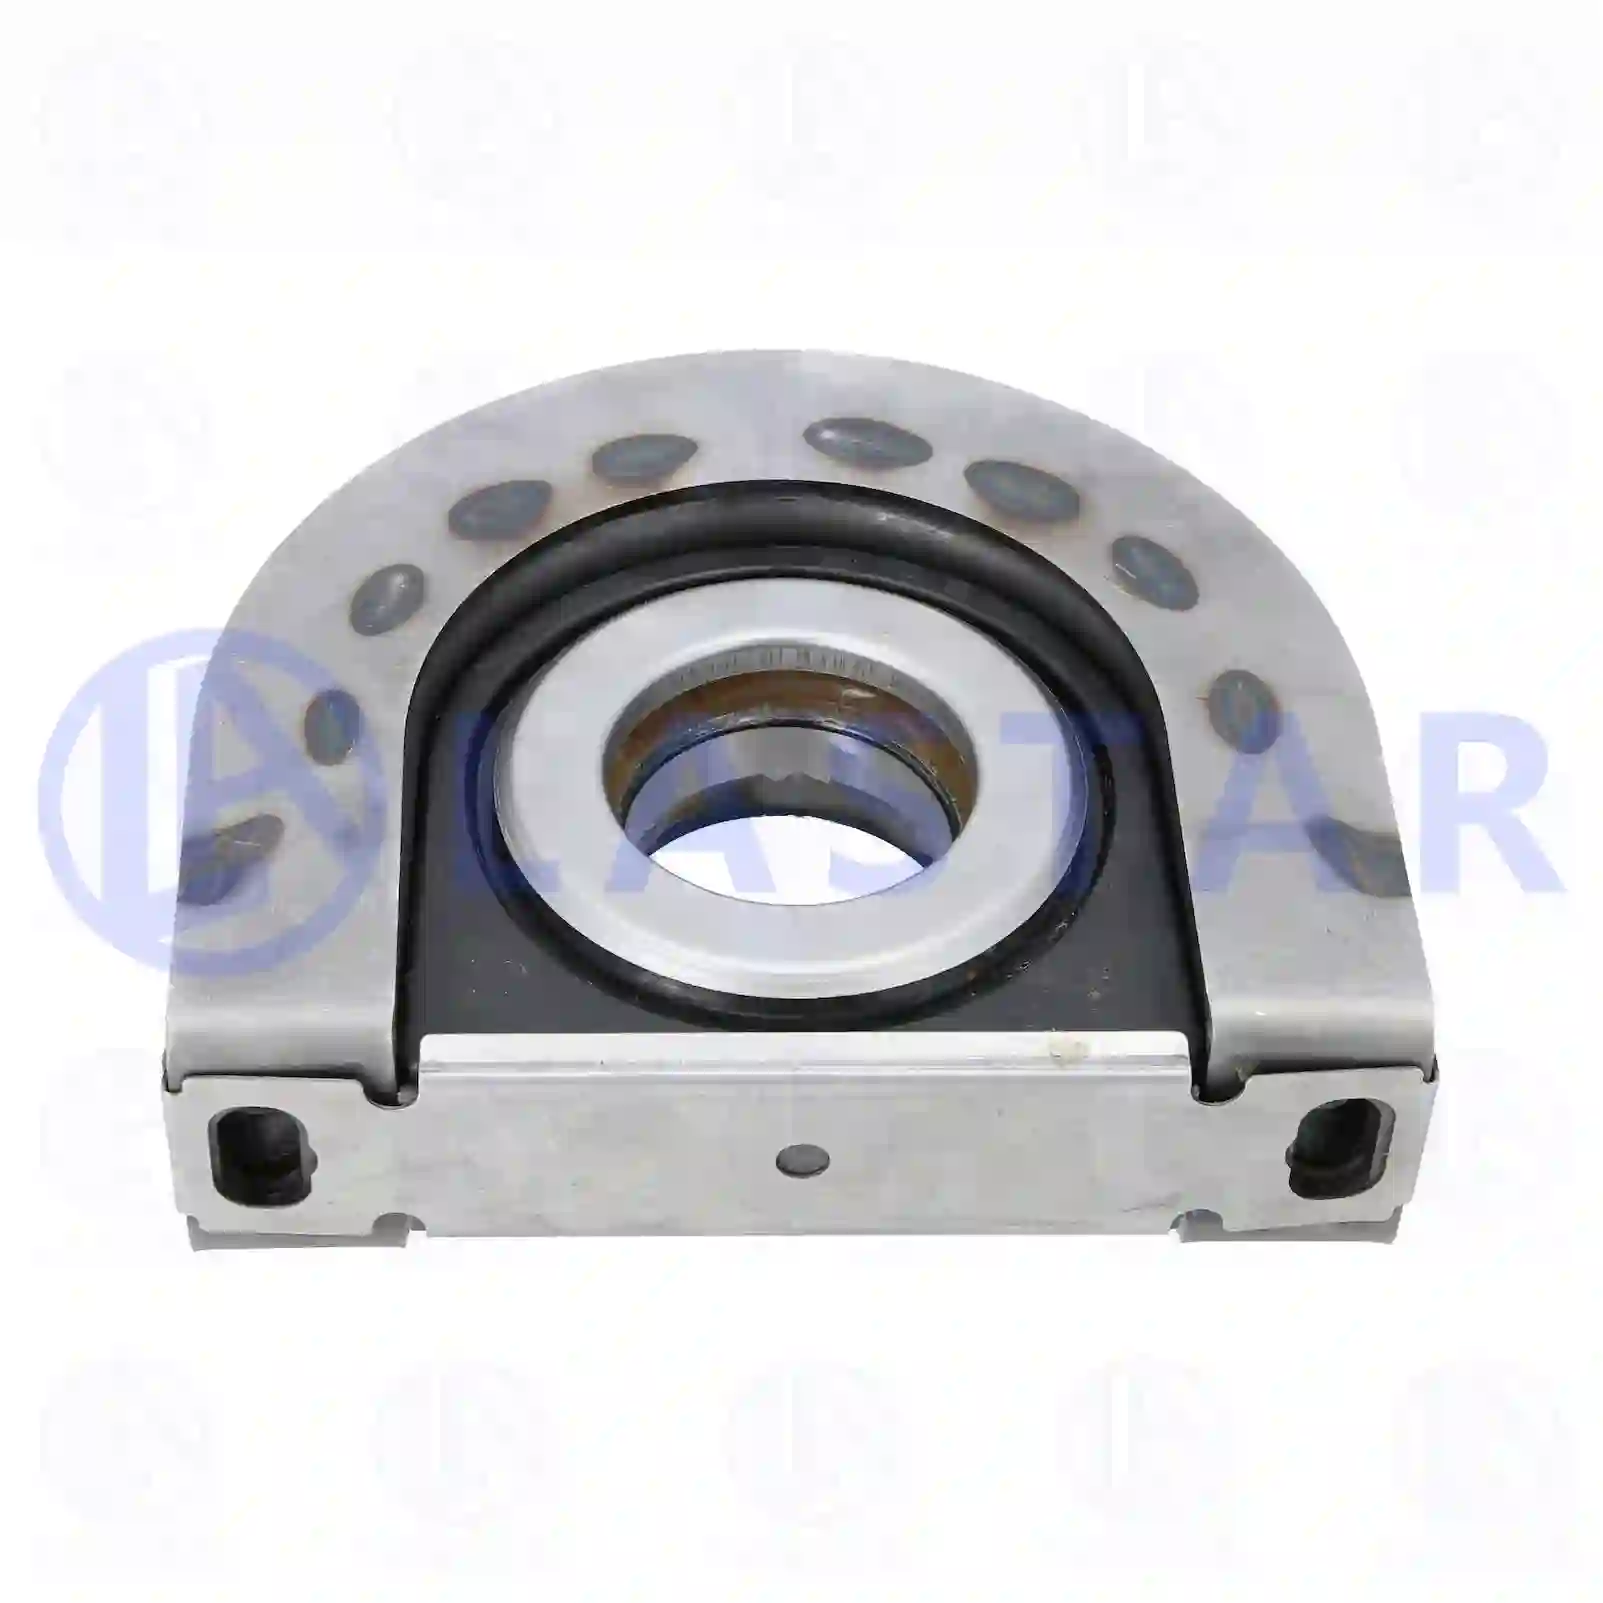 Support Bearing Center bearing, reinforced version, la no: 77734289 ,  oem no:1288220S, 1323765S, 1435557S, 1779697 Lastar Spare Part | Truck Spare Parts, Auotomotive Spare Parts